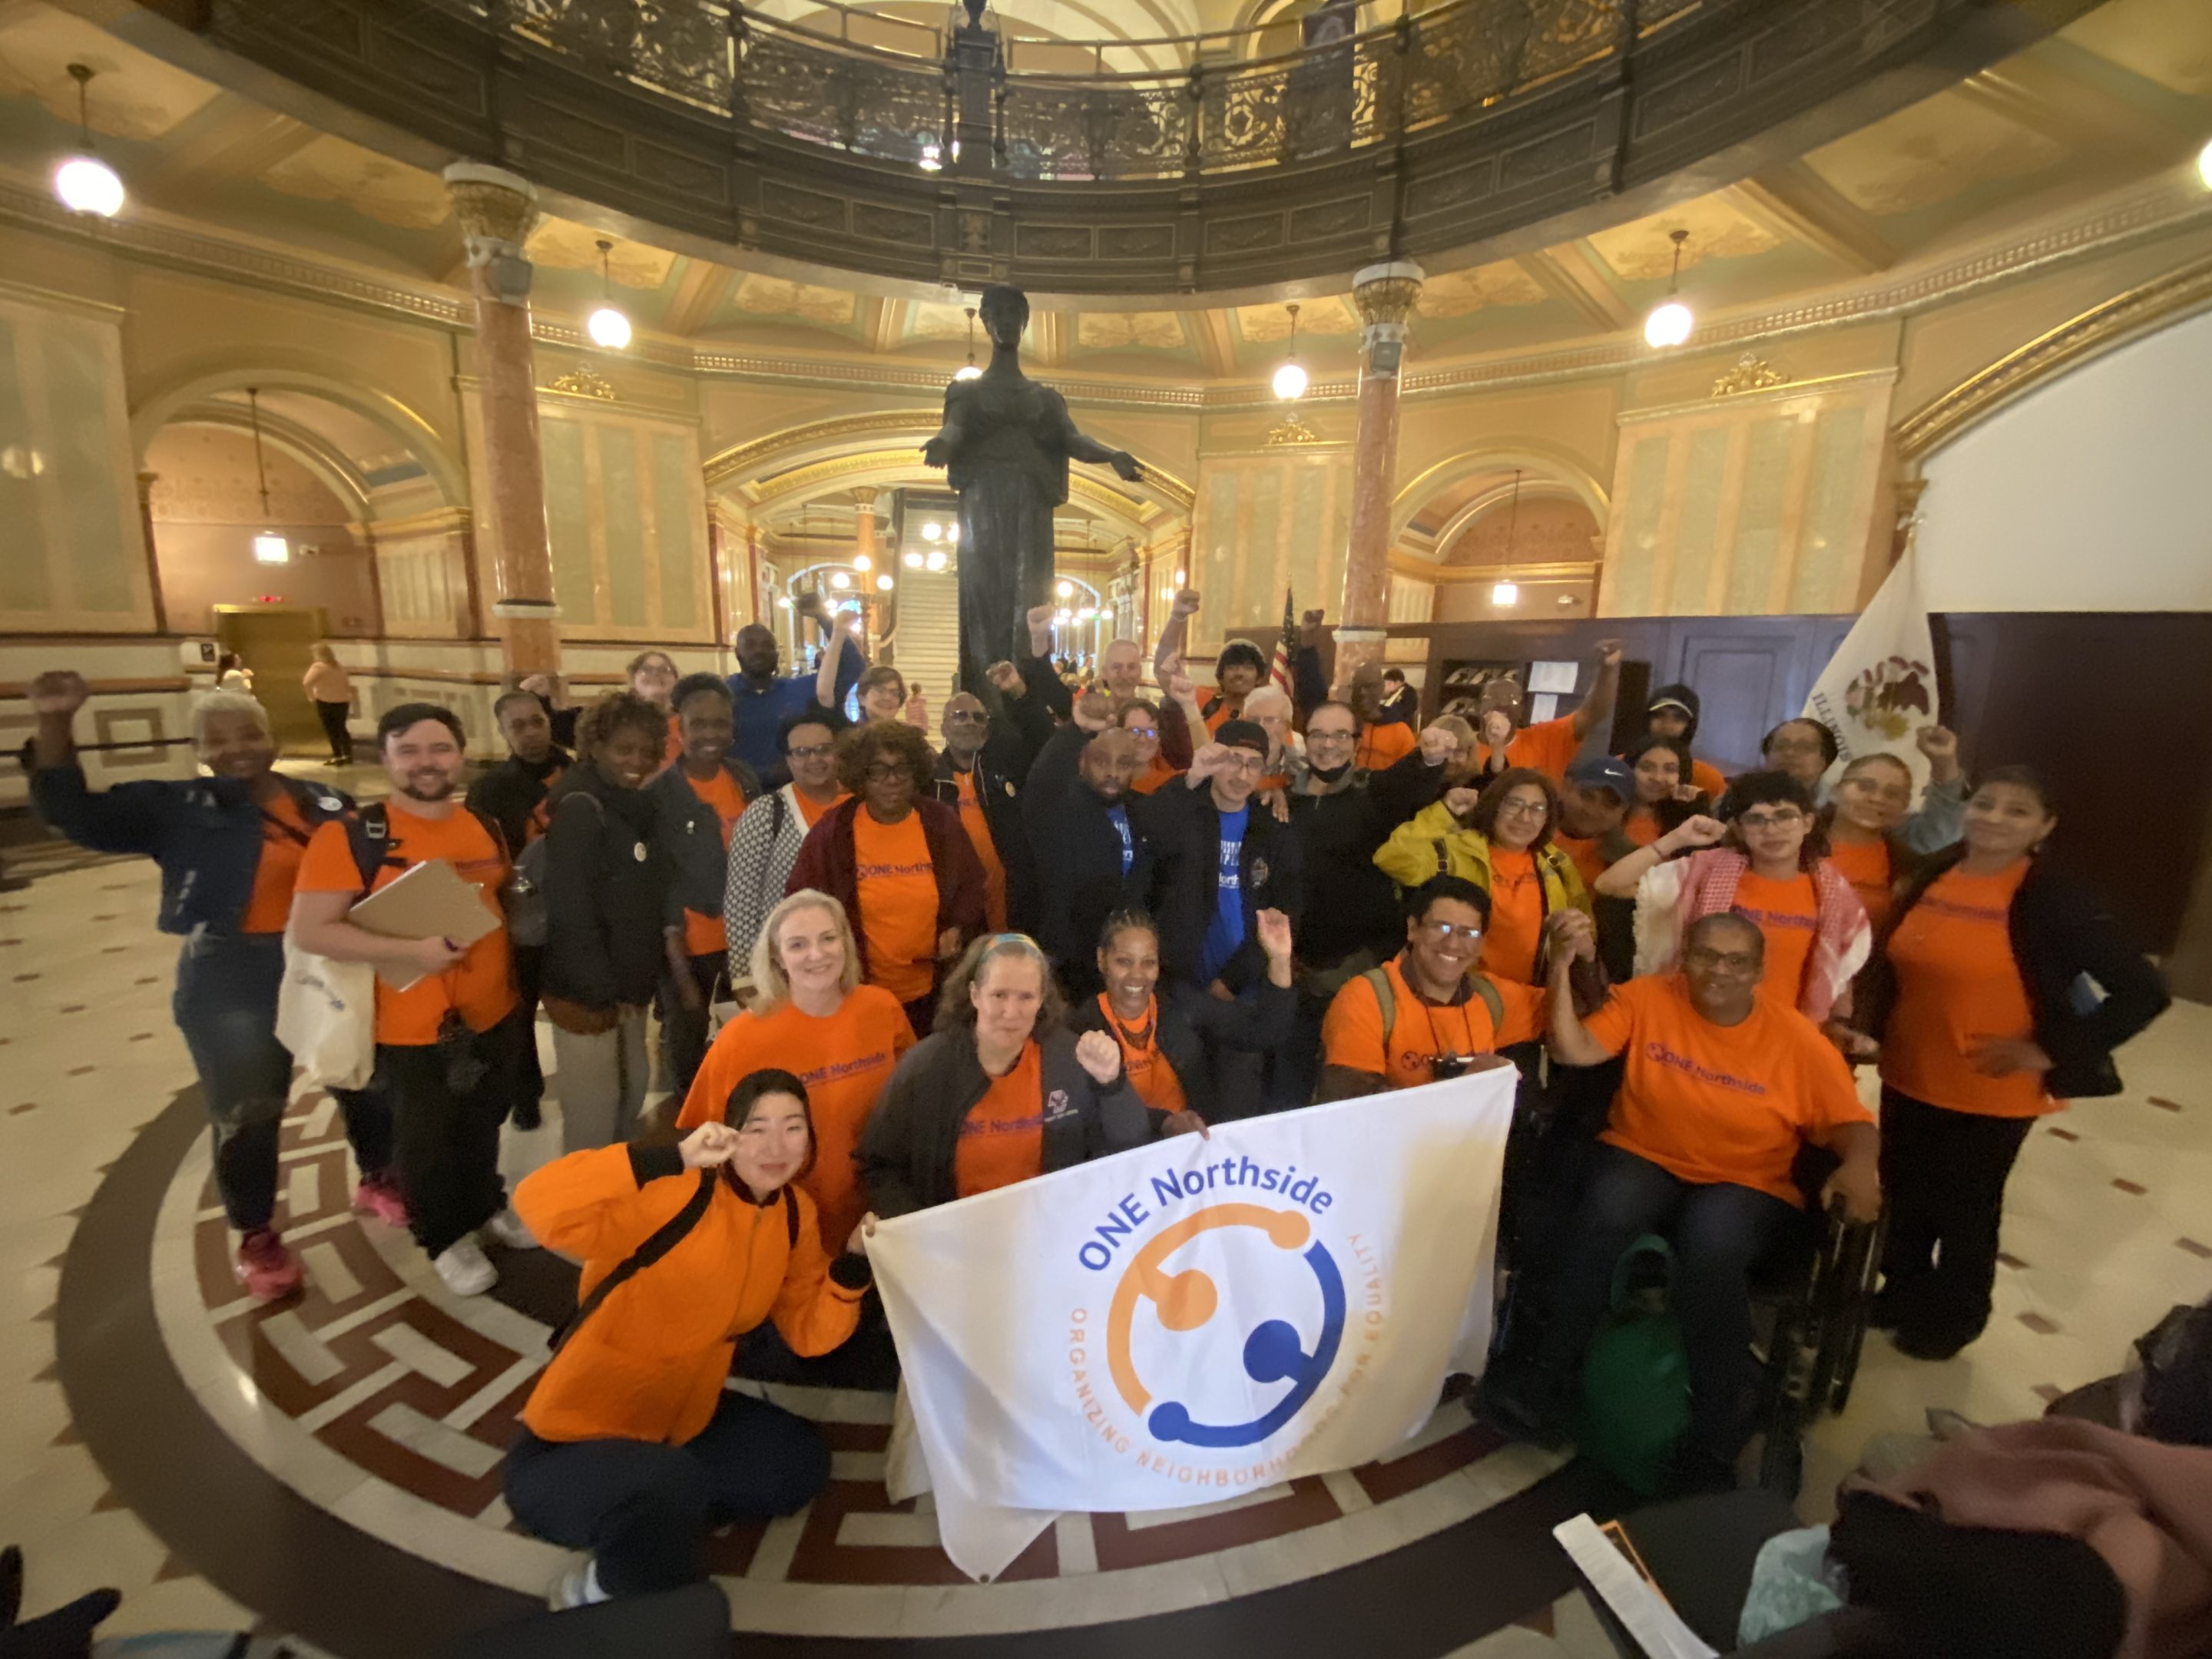 a large group in the capitol with a one northside banner